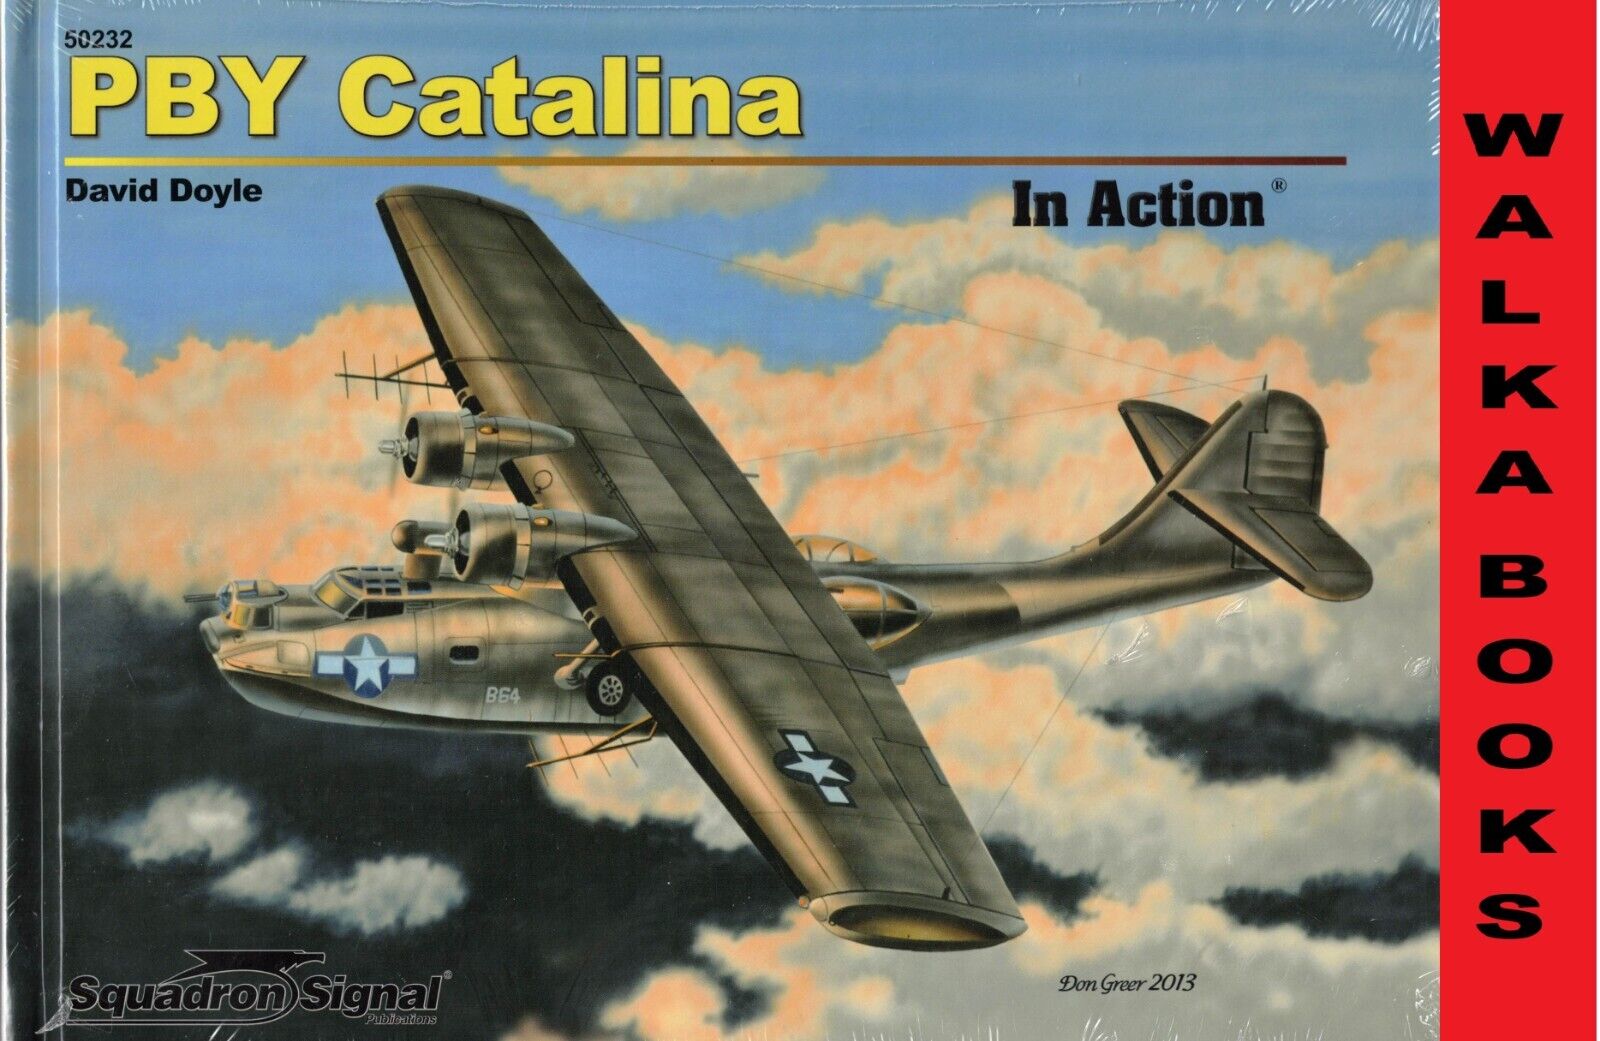 50232 PBY Catalina = HARD COVER = Squadron Signal = NEW = Combined Shipping